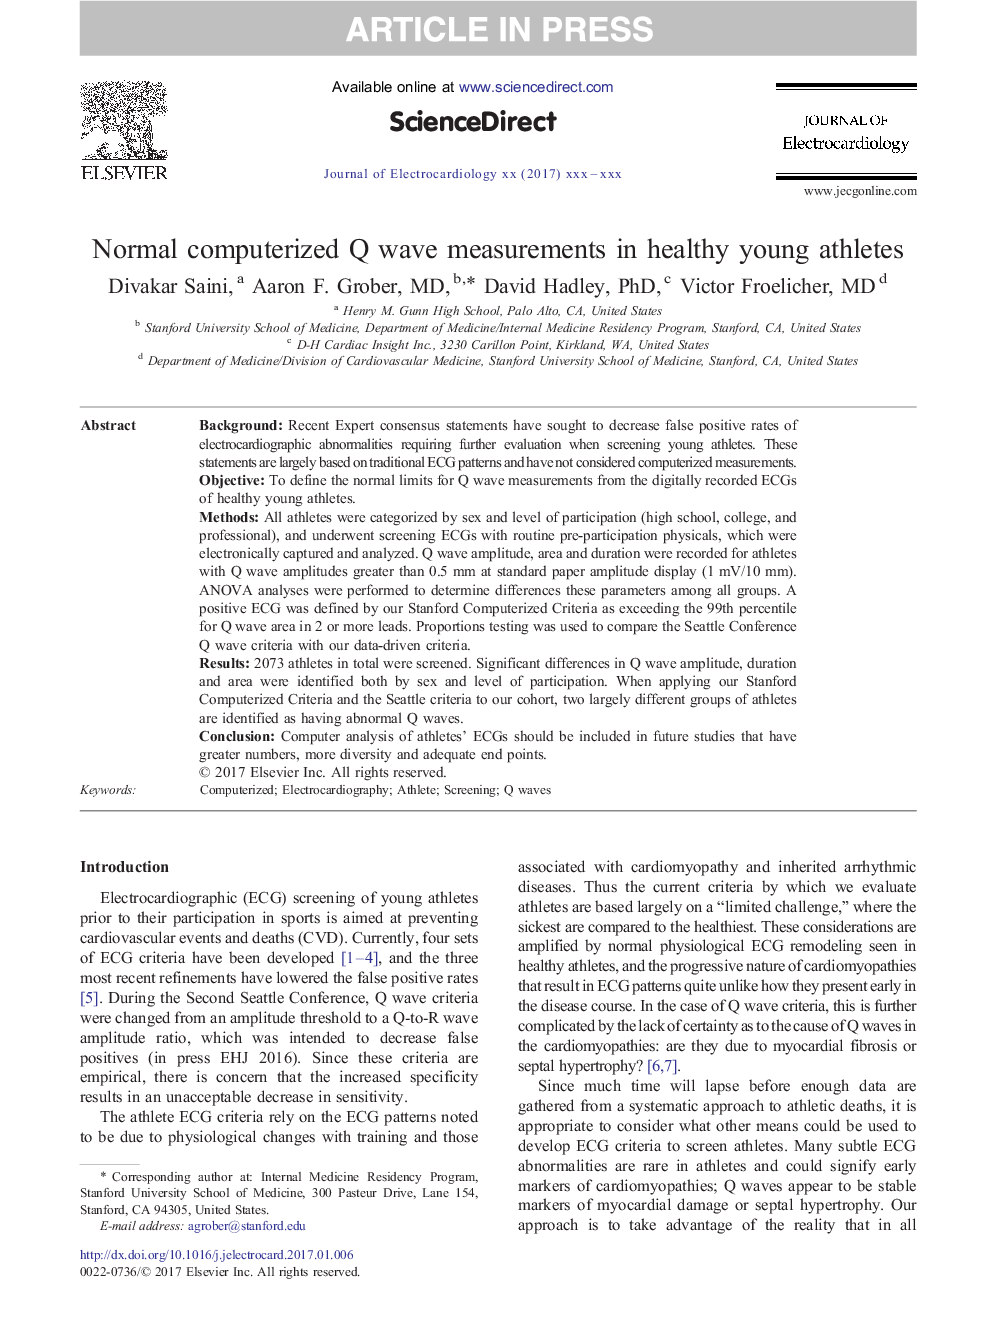 Normal computerized Q wave measurements in healthy young athletes